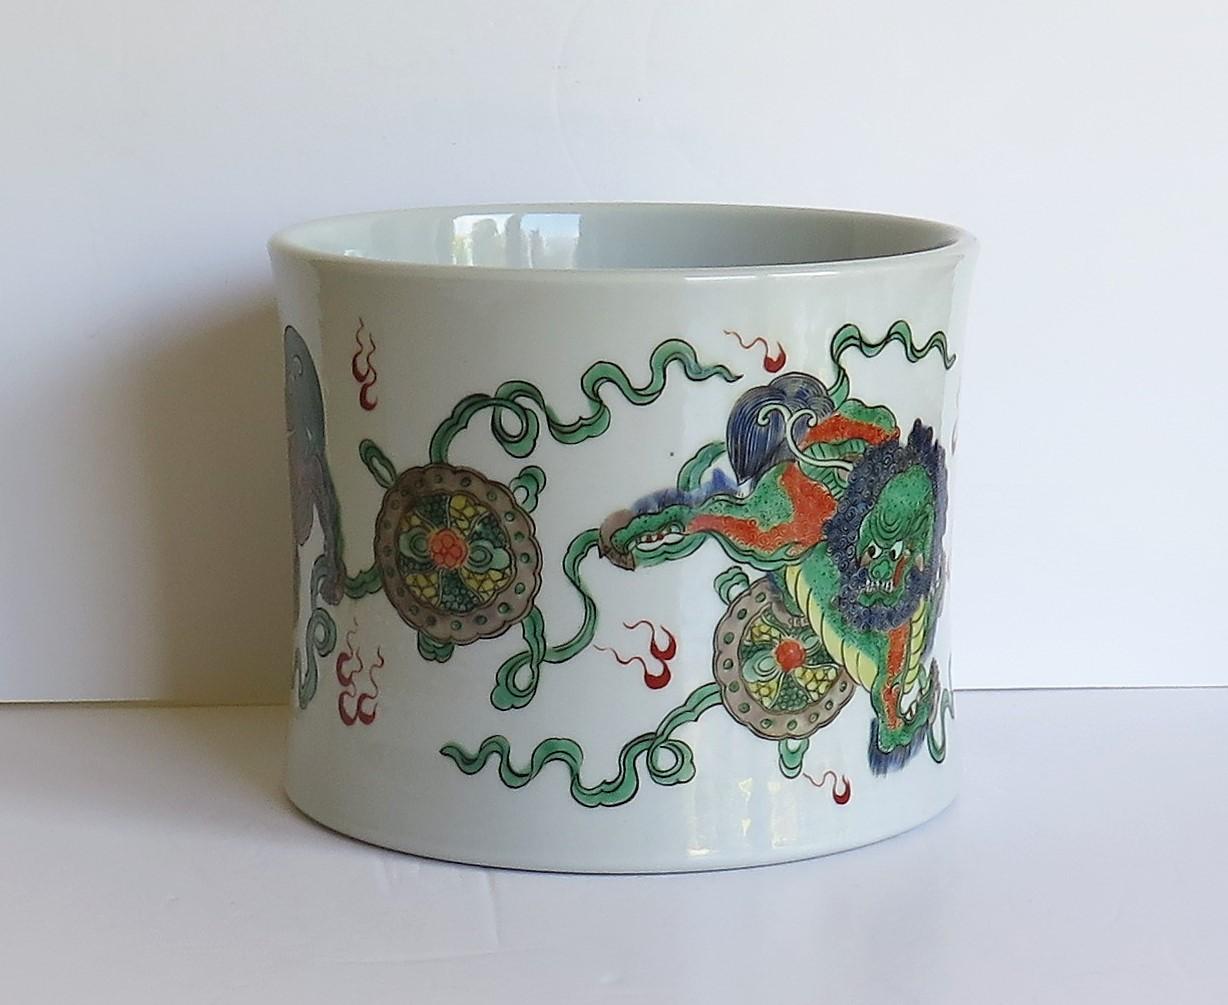 20th Century Chinese Export Brush Pot or Bitong Porcelain, Hand Painted with Three Lion Dogs